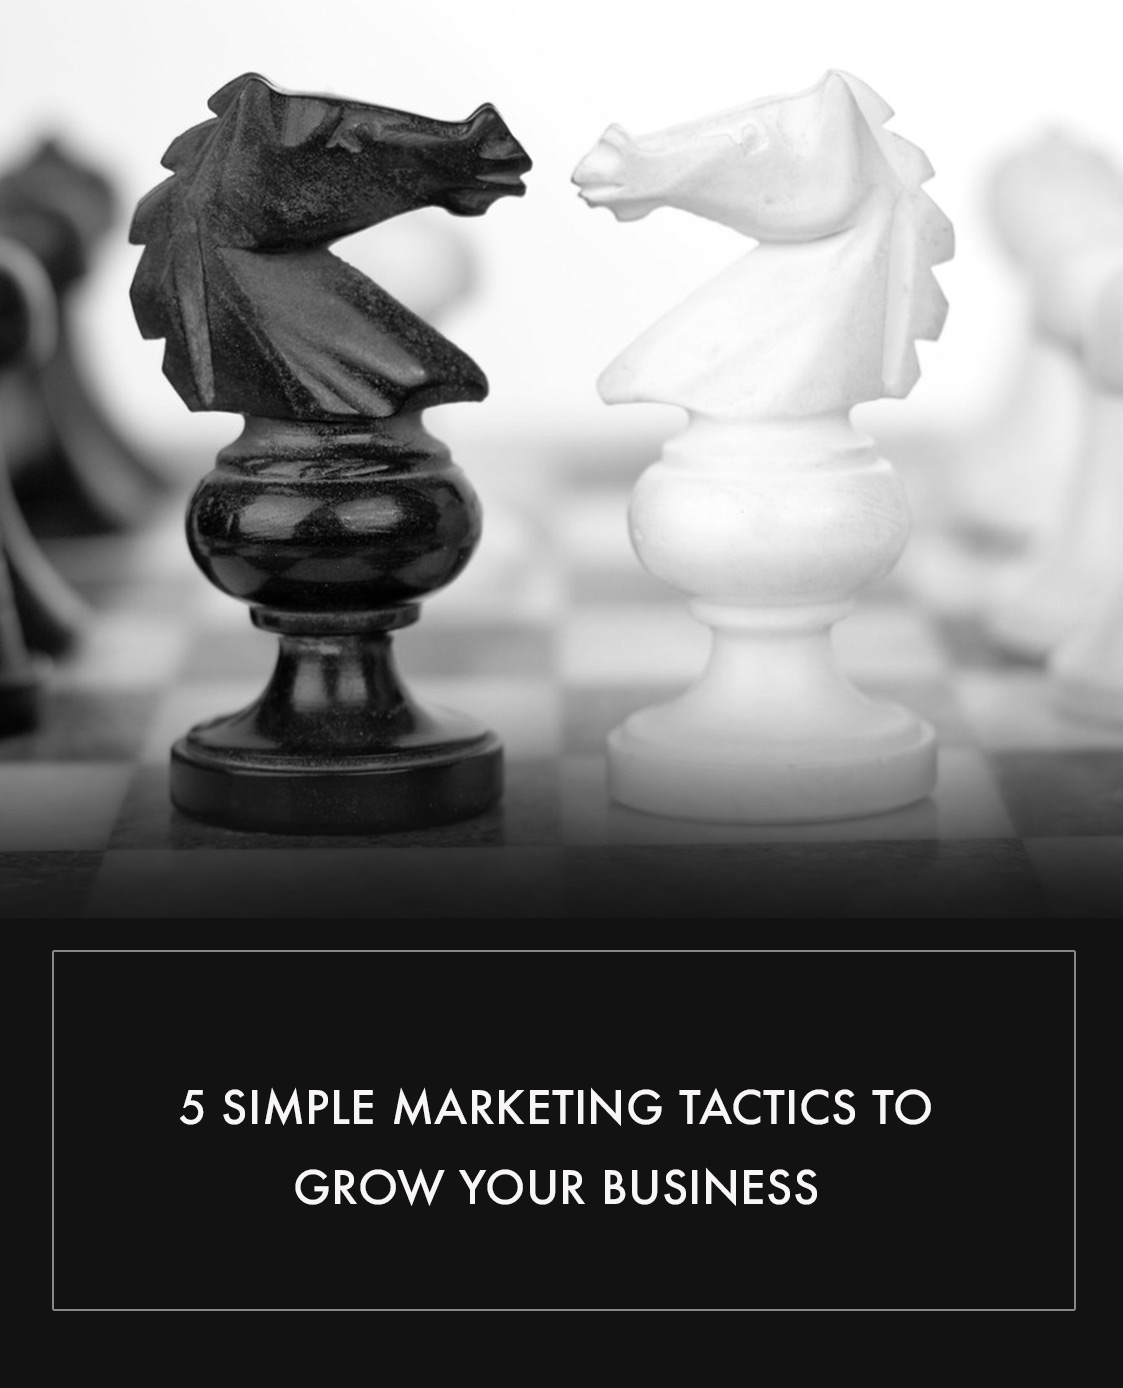 5 Simple Marketing Tactics to Grow your business